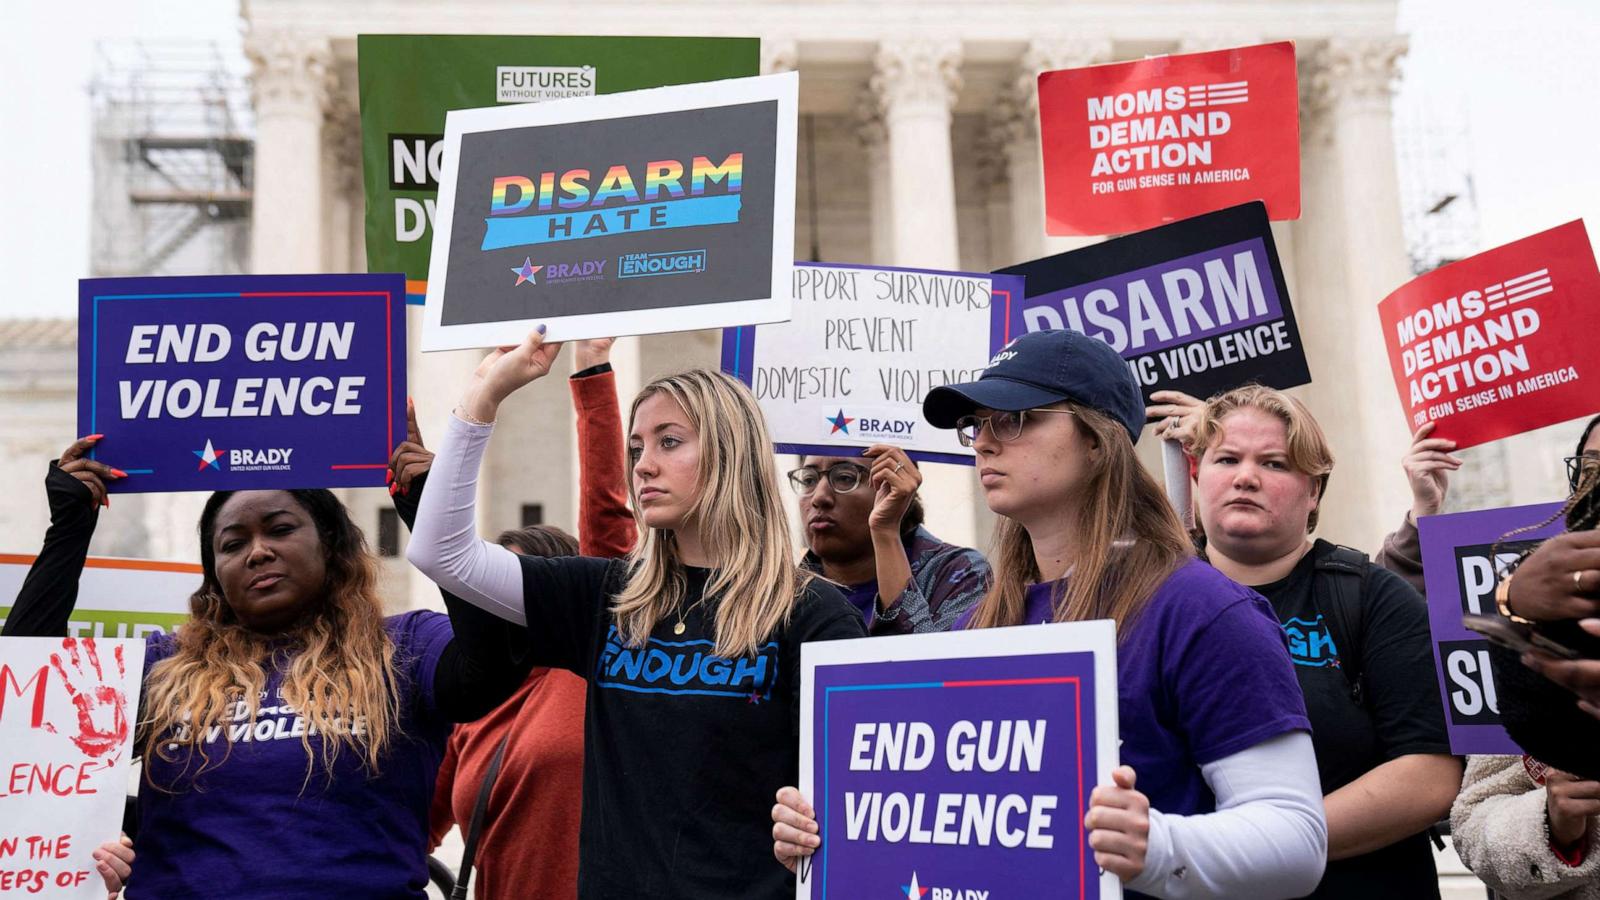 Court to hear major gun-rights dispute over domestic-violence